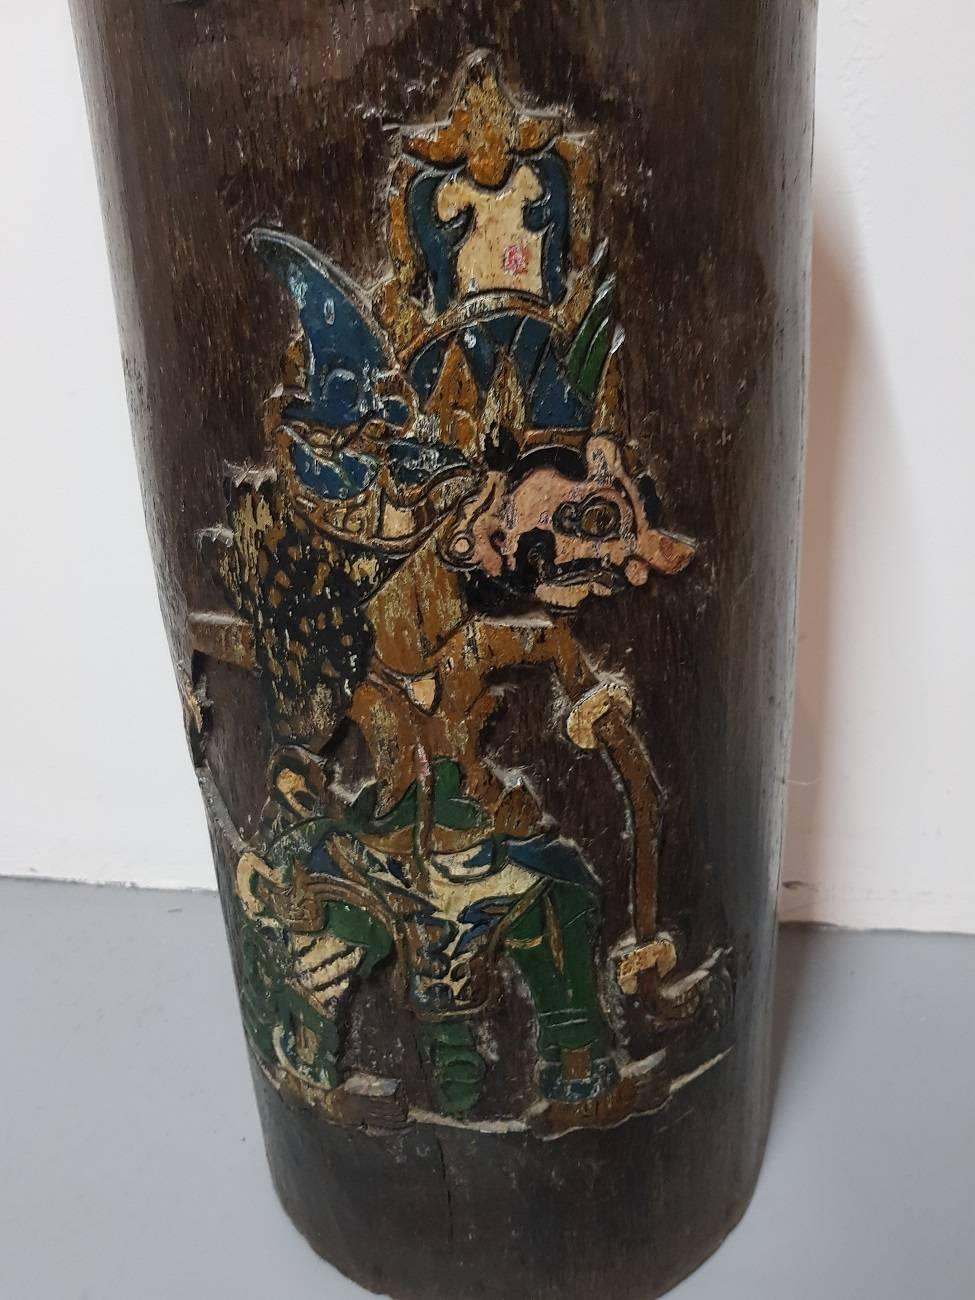 Vintage mid-20th century Indonesian palm tree trunk umbrella stand decorated with a carving depicting a wajang doll and provided with a zinc inner tray.

The measurements are,
Depth 26 cm/ 10.2 inch.
Width 26 cm/ 10.2 inch.
Height 64 cm/ 25.1